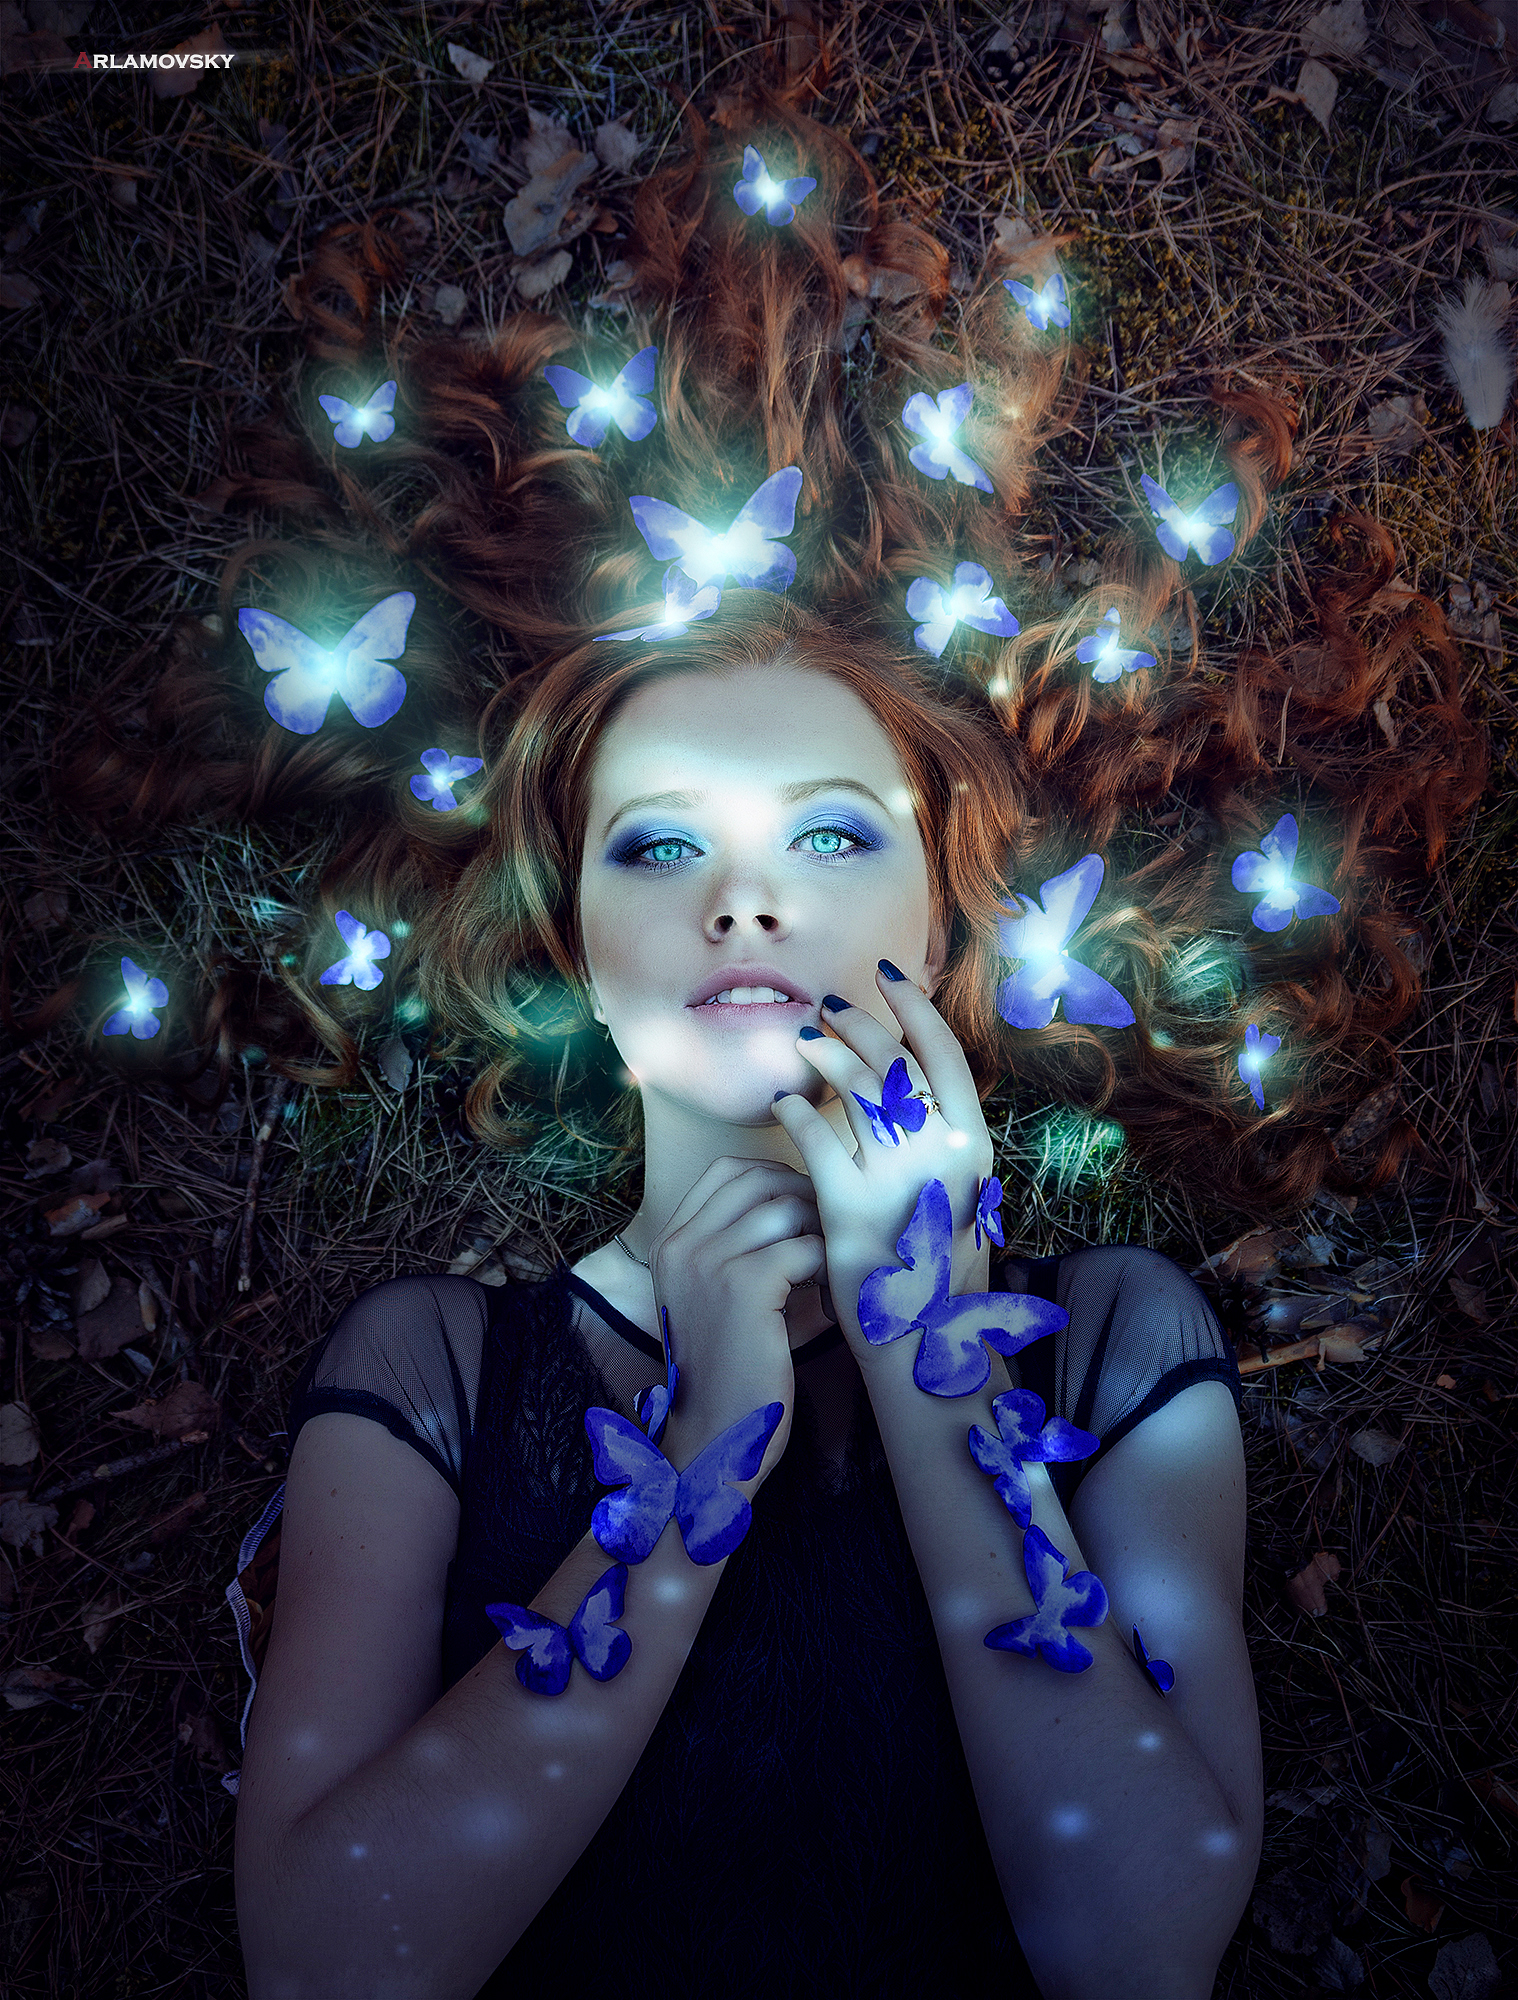 People 1518x2000 arlamovsky women women outdoors retouching forest photography photoshopped brunette blue eyes lying down portrait face hair   butterfly watermarked portrait display